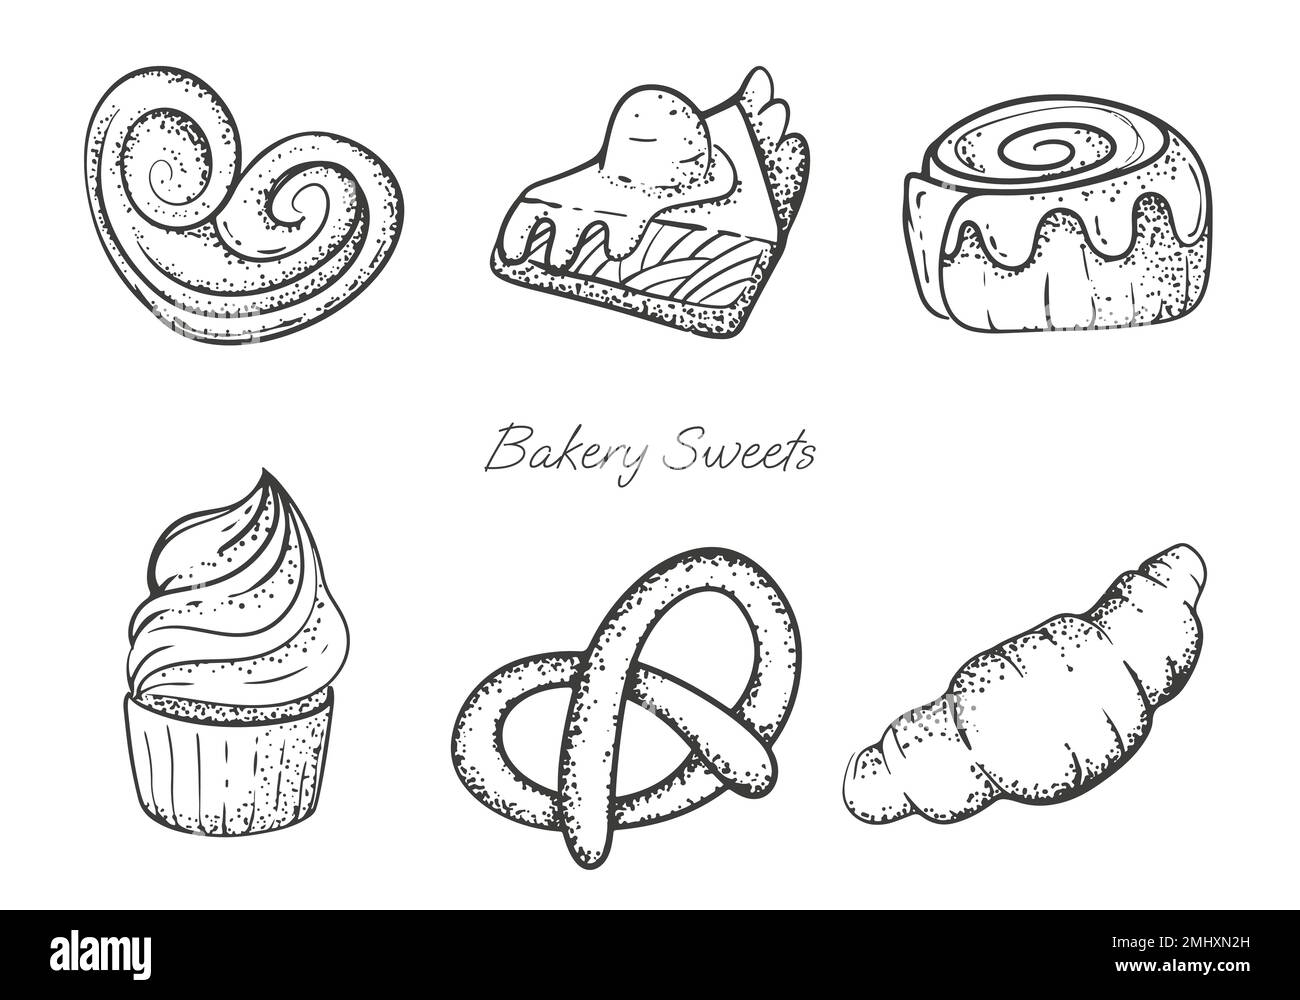 baking set of elements in hand drawing style Stock Vector